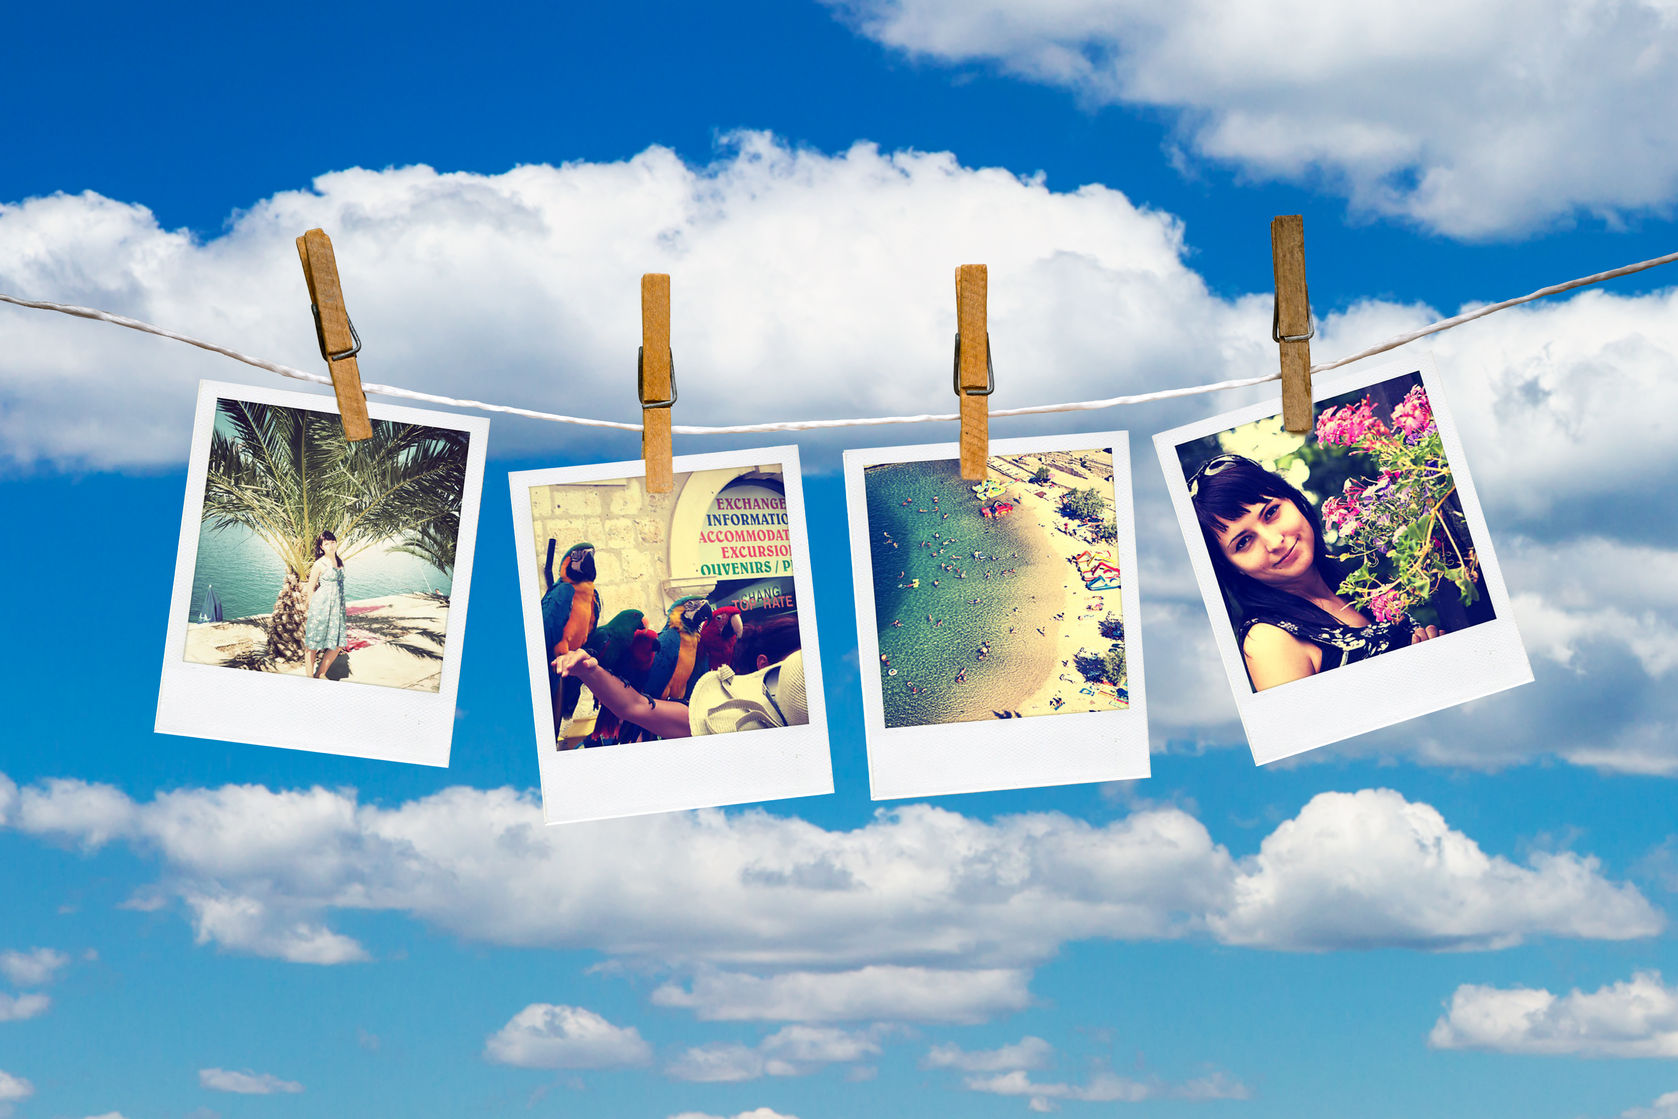 The Best Photo Apps For Keeping Your Memories In The Clouds